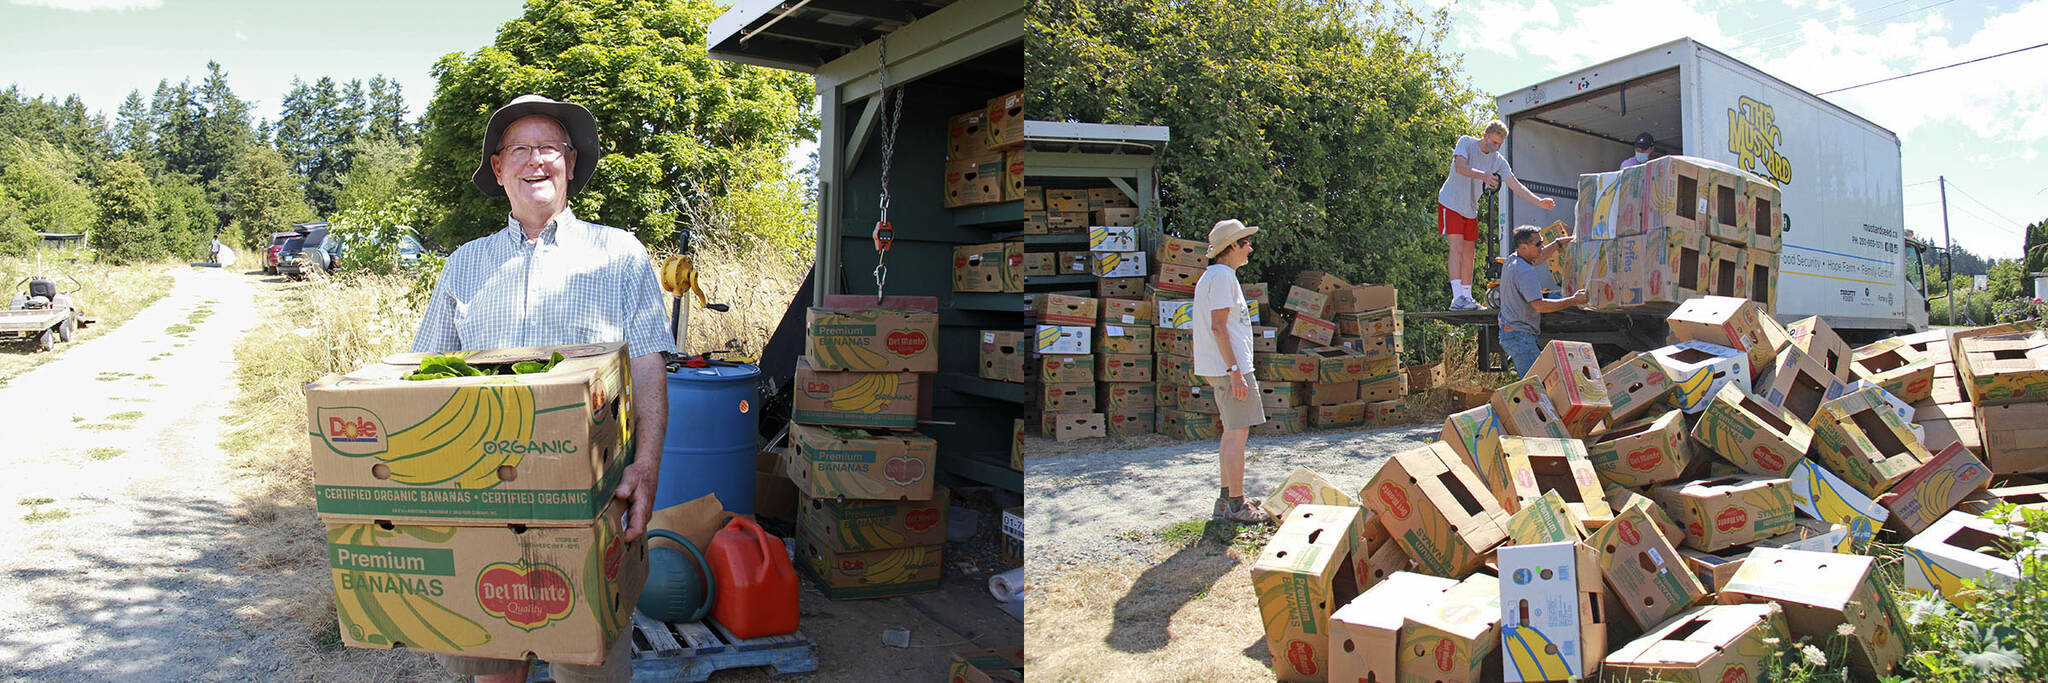 When the Mustard Seed arrives around 11 a.m. July 21, workers drop off 150 empty banana boxes and Jason Austin (left) and his volunteers load up 40 boxes full of romaine lettuce in exchange. The empty ones will quickly be filled with beans, swiss chard, zucchinis, bok choy, and the such, to be distributed to other organizations. (Jane Skrypnek/News Staff)